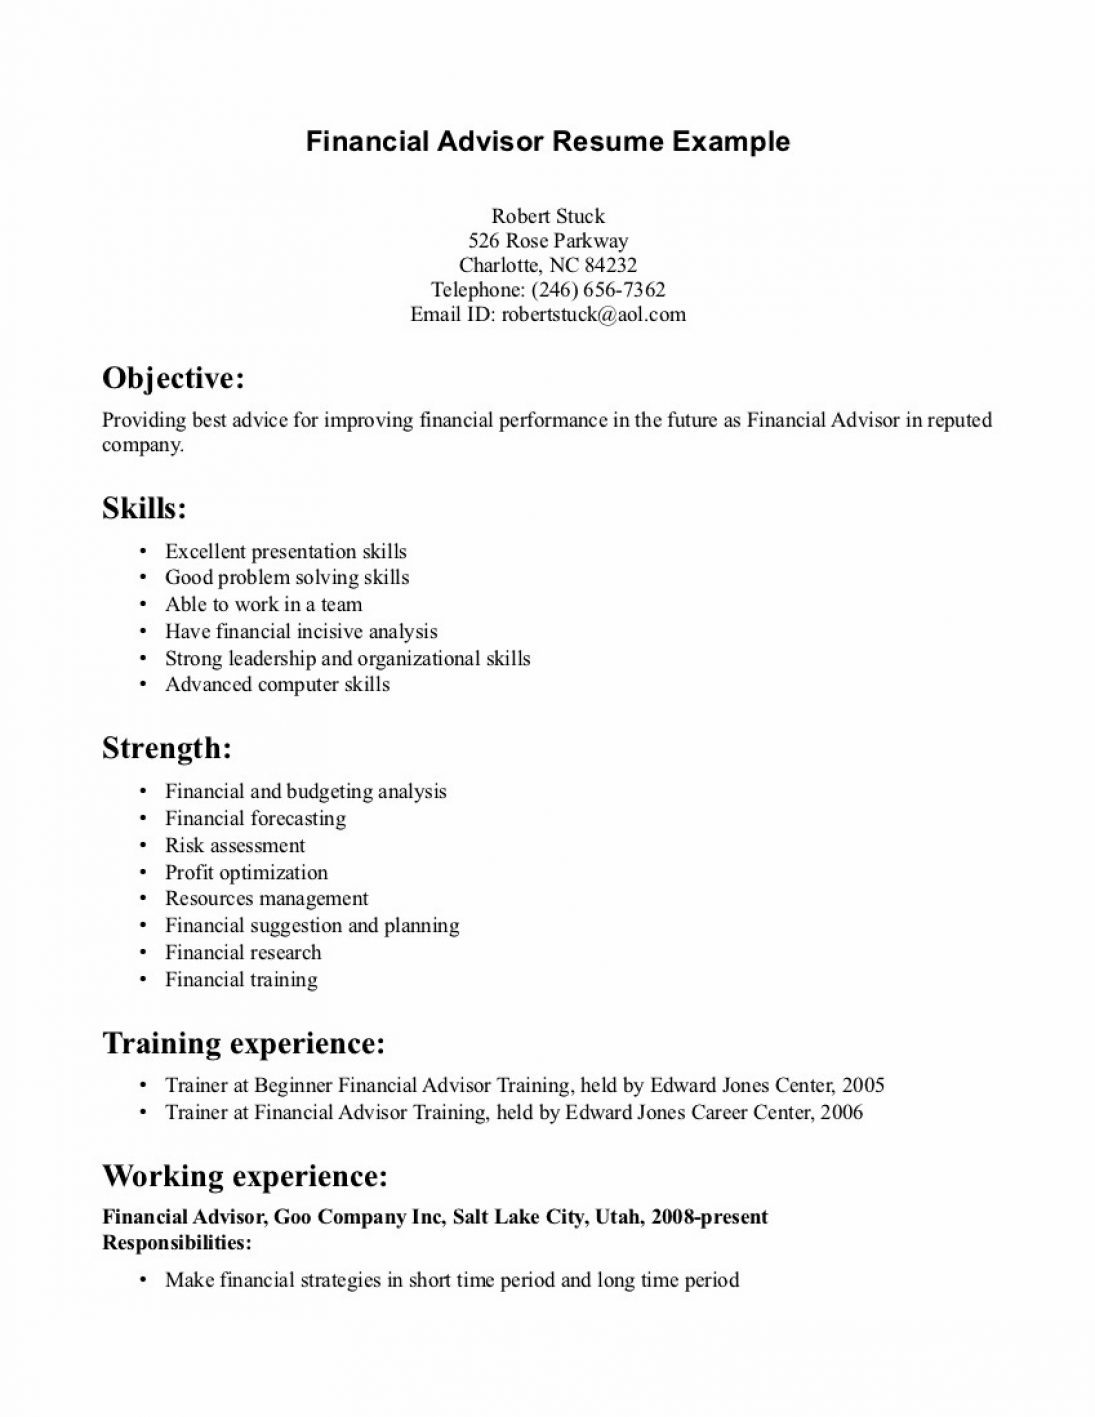 Resume Examples For Jobs Tax Preparer Resume Example Examples Accounting Jobs Financial Consultant Job Description Template Templates Easy Thus 1095x1417 resume examples for jobs|wikiresume.com